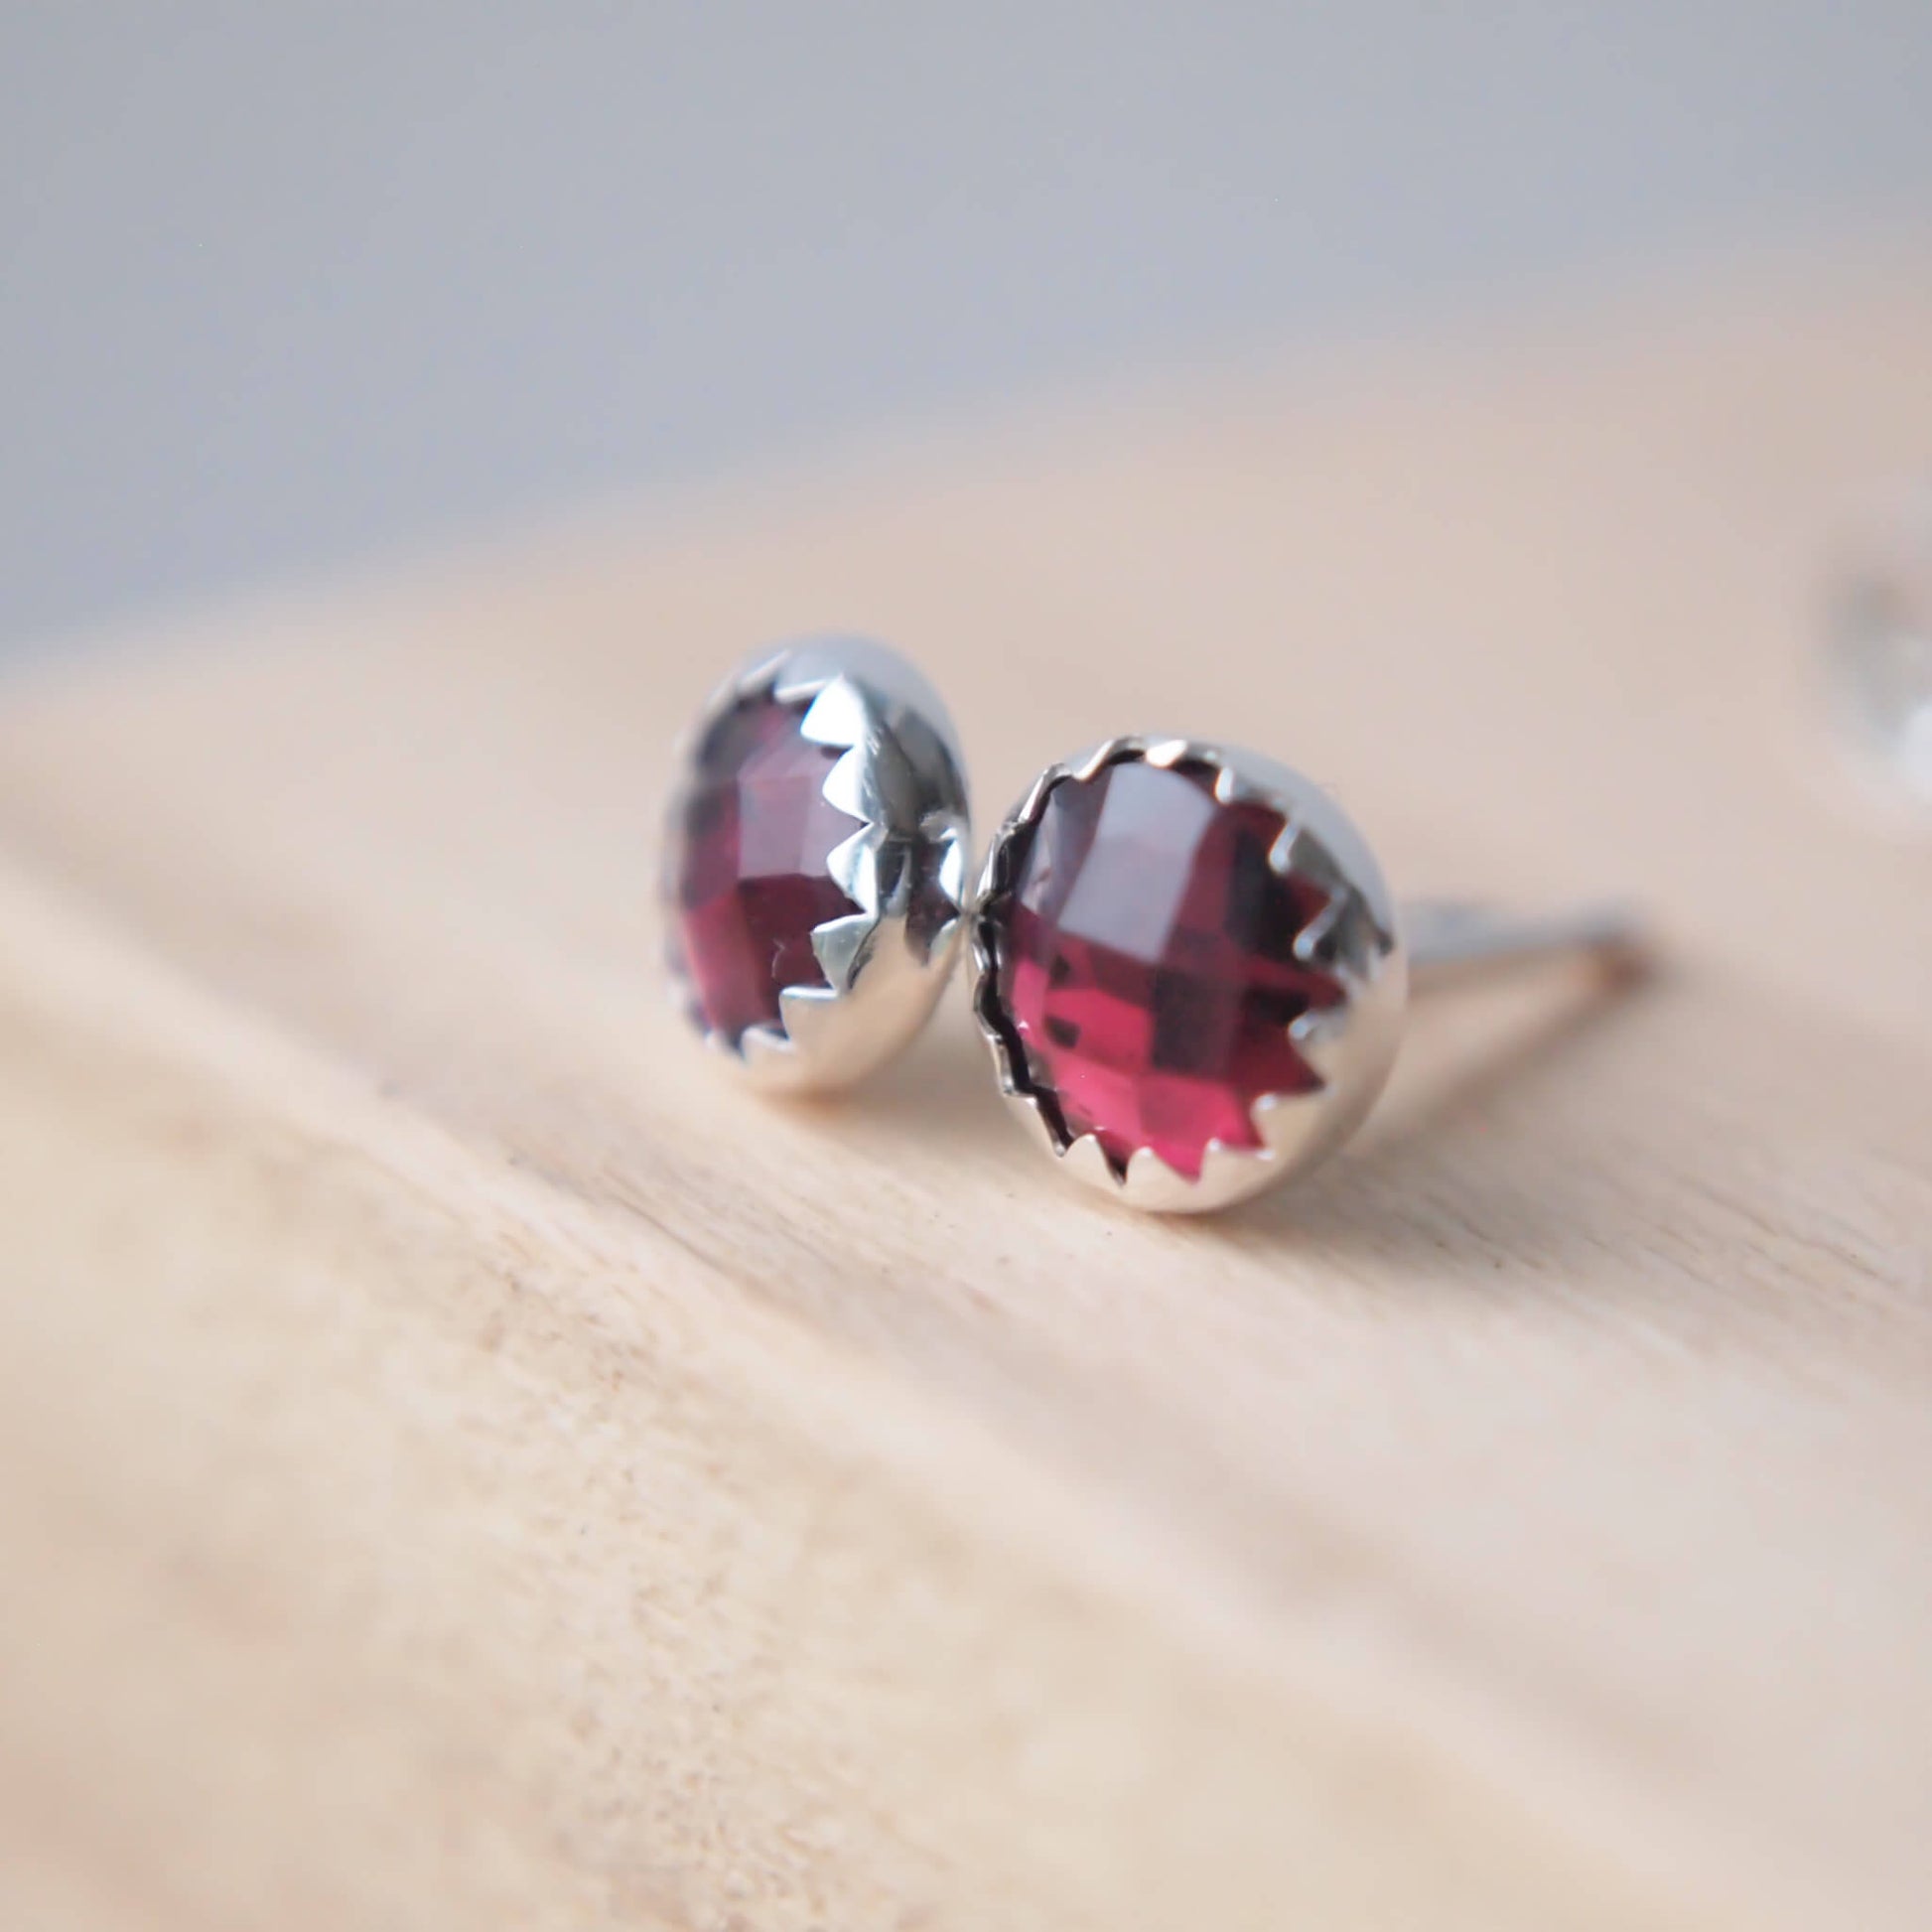 A pair of modern style gemstone earrings in sterling silver and garnet. round gemstones with a face cut measuring 5mm, set simple into a modern silver surround with a serrated edge that is very subtle. Hand crafted in a small jeweller studio in Scotland UK